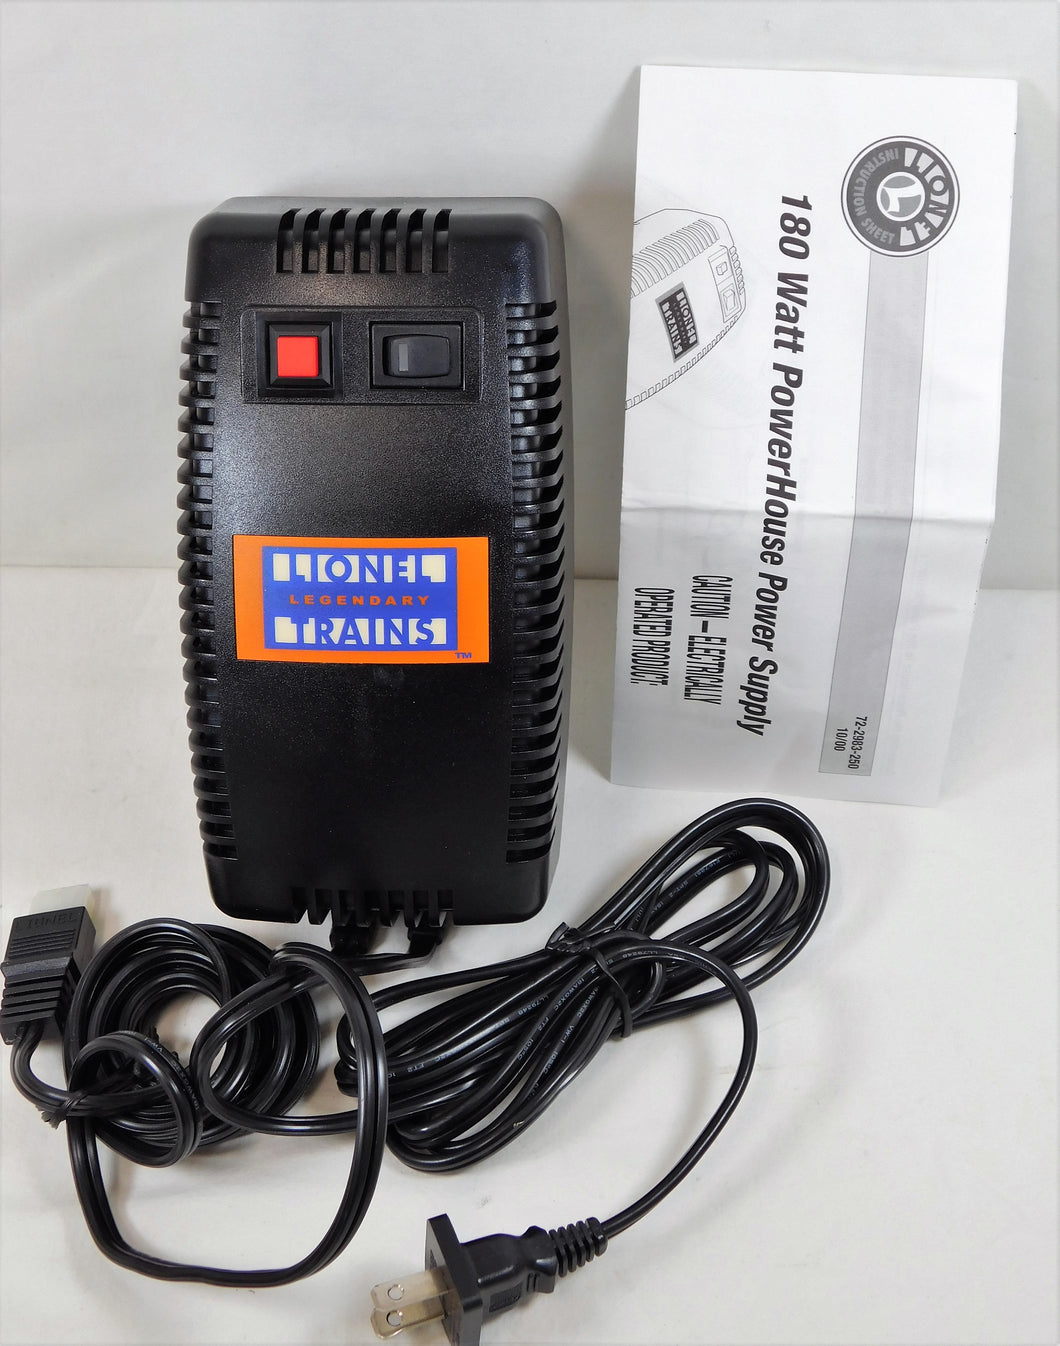 Lionel Powerhouse PH-1 22983 Power Supply for ZW, TMCC more 180 watts 10 amps